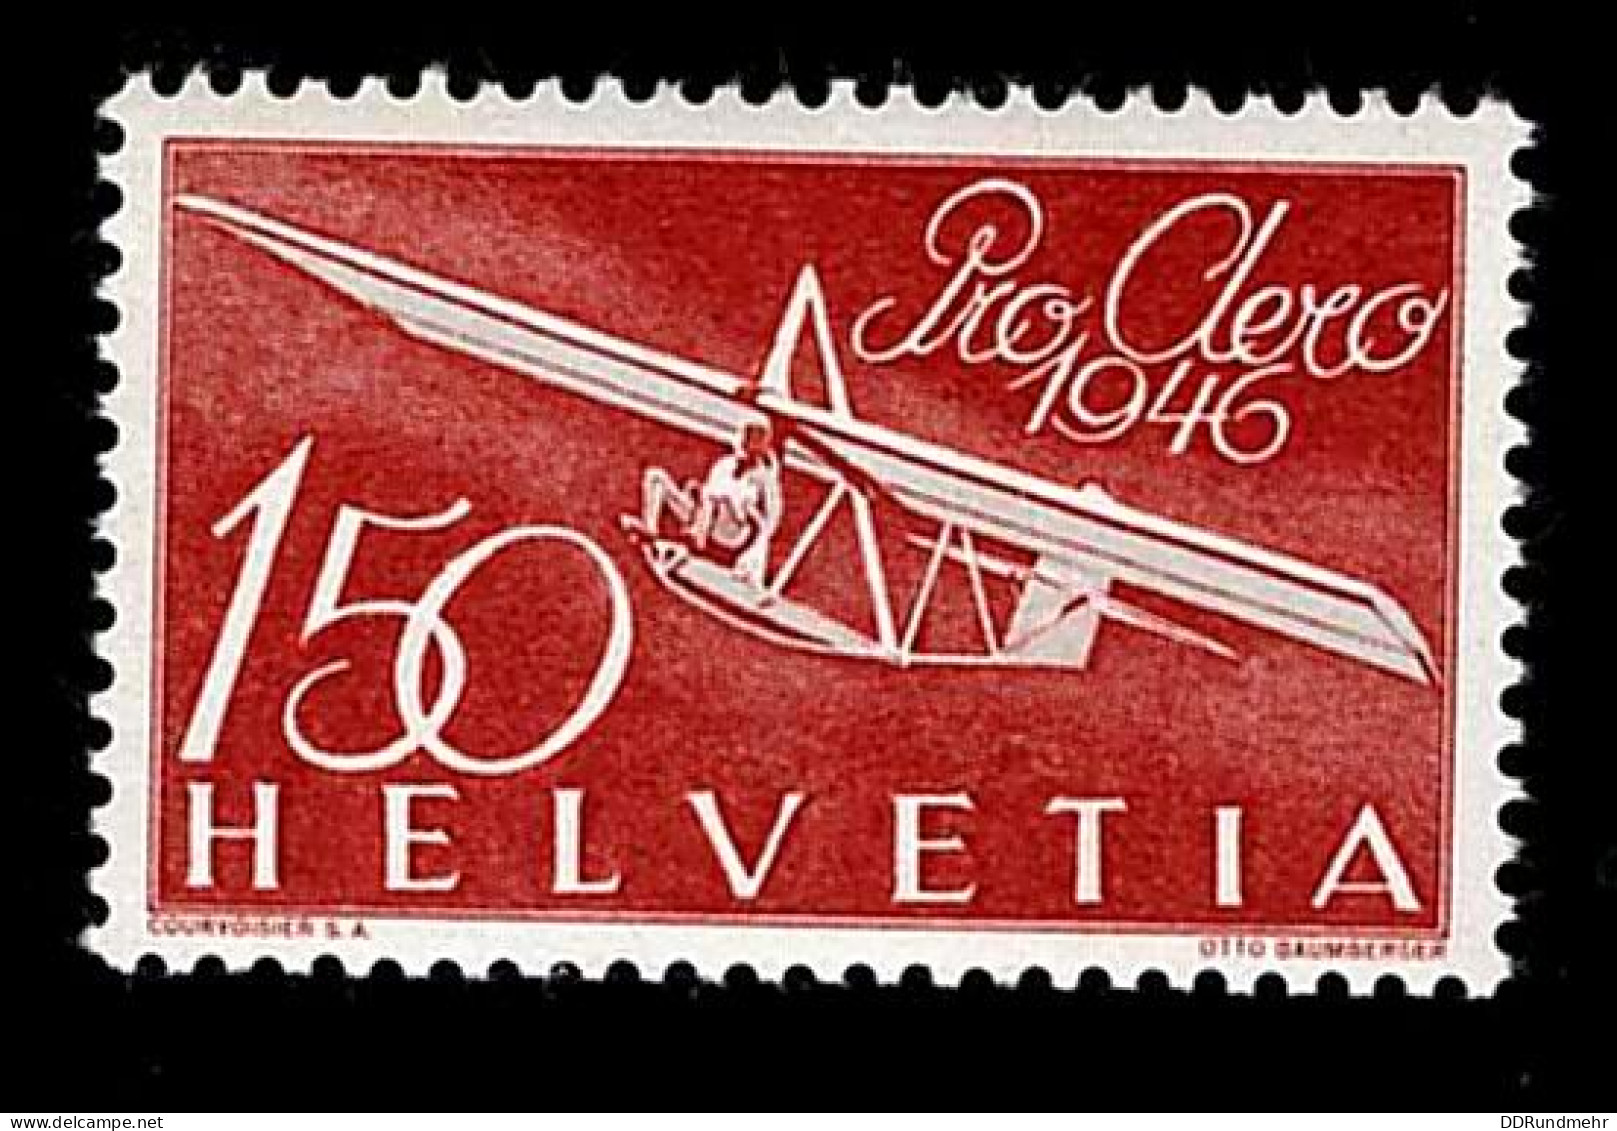 1946 Pro Aero  Michel CH 470 Stamp Number CH C41 Yvert Et Tellier CH PA40 Stanley Gibbons CH 466 Unificato CH A40 Xx MNH - Unused Stamps